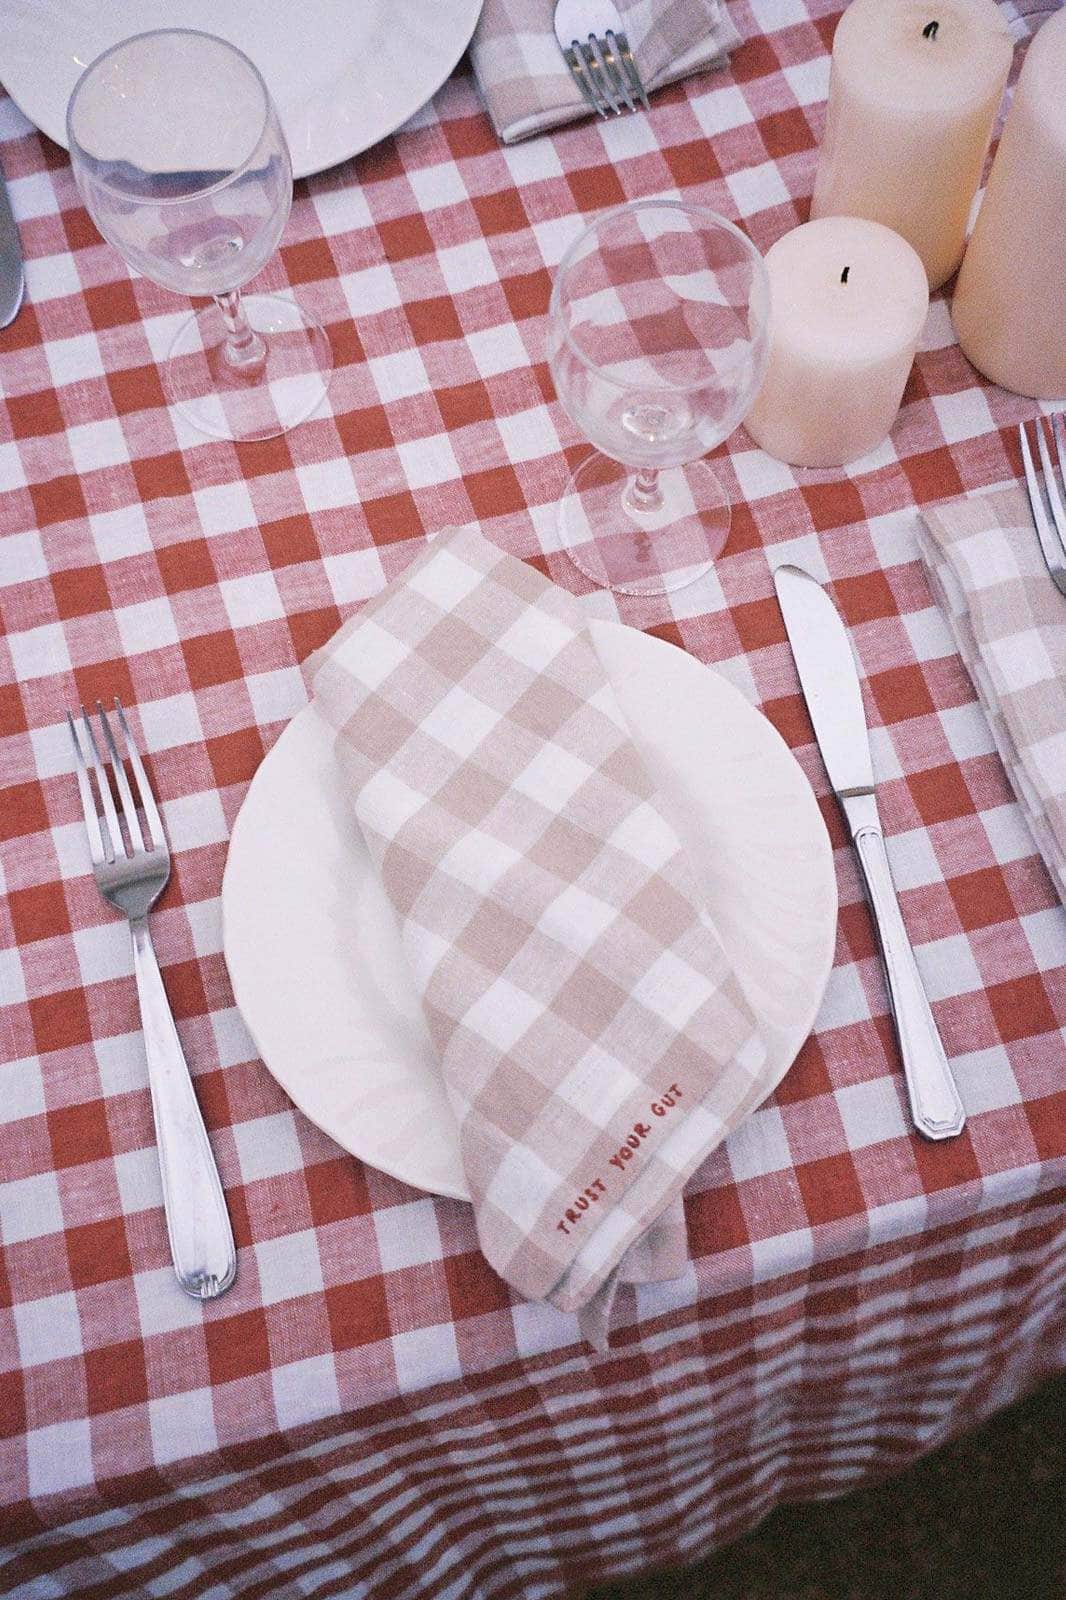 Load image into Gallery viewer, Gingham Gratitude Napkins - Set of 4
